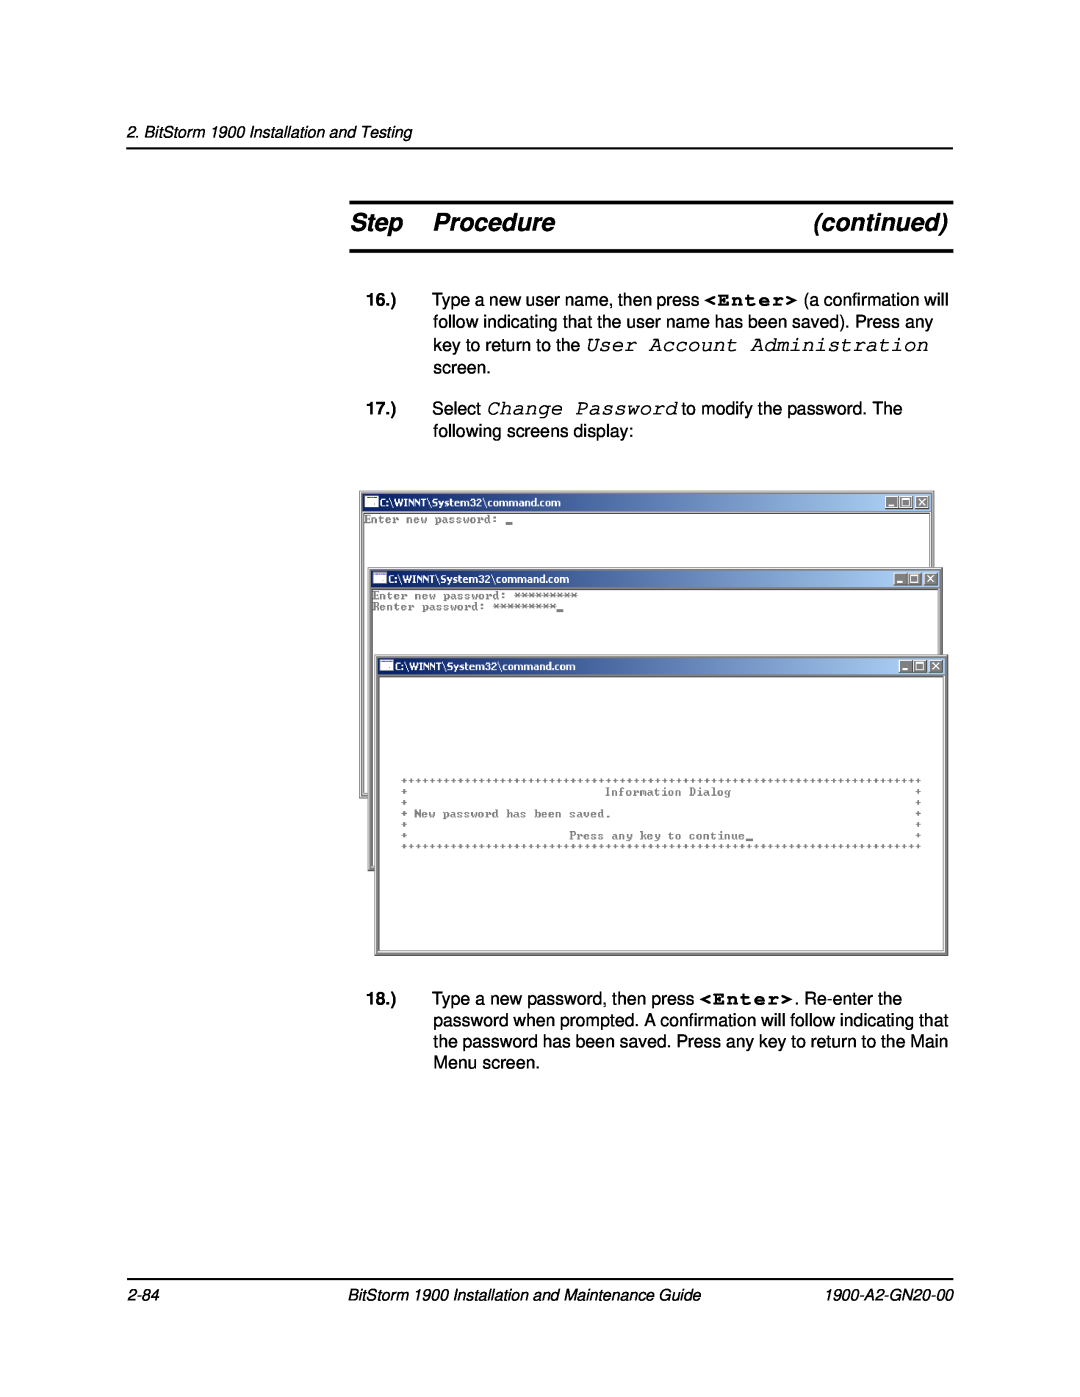 Paradyne 1900 manual key to return to the User Account Administration, Step Procedure, continued 